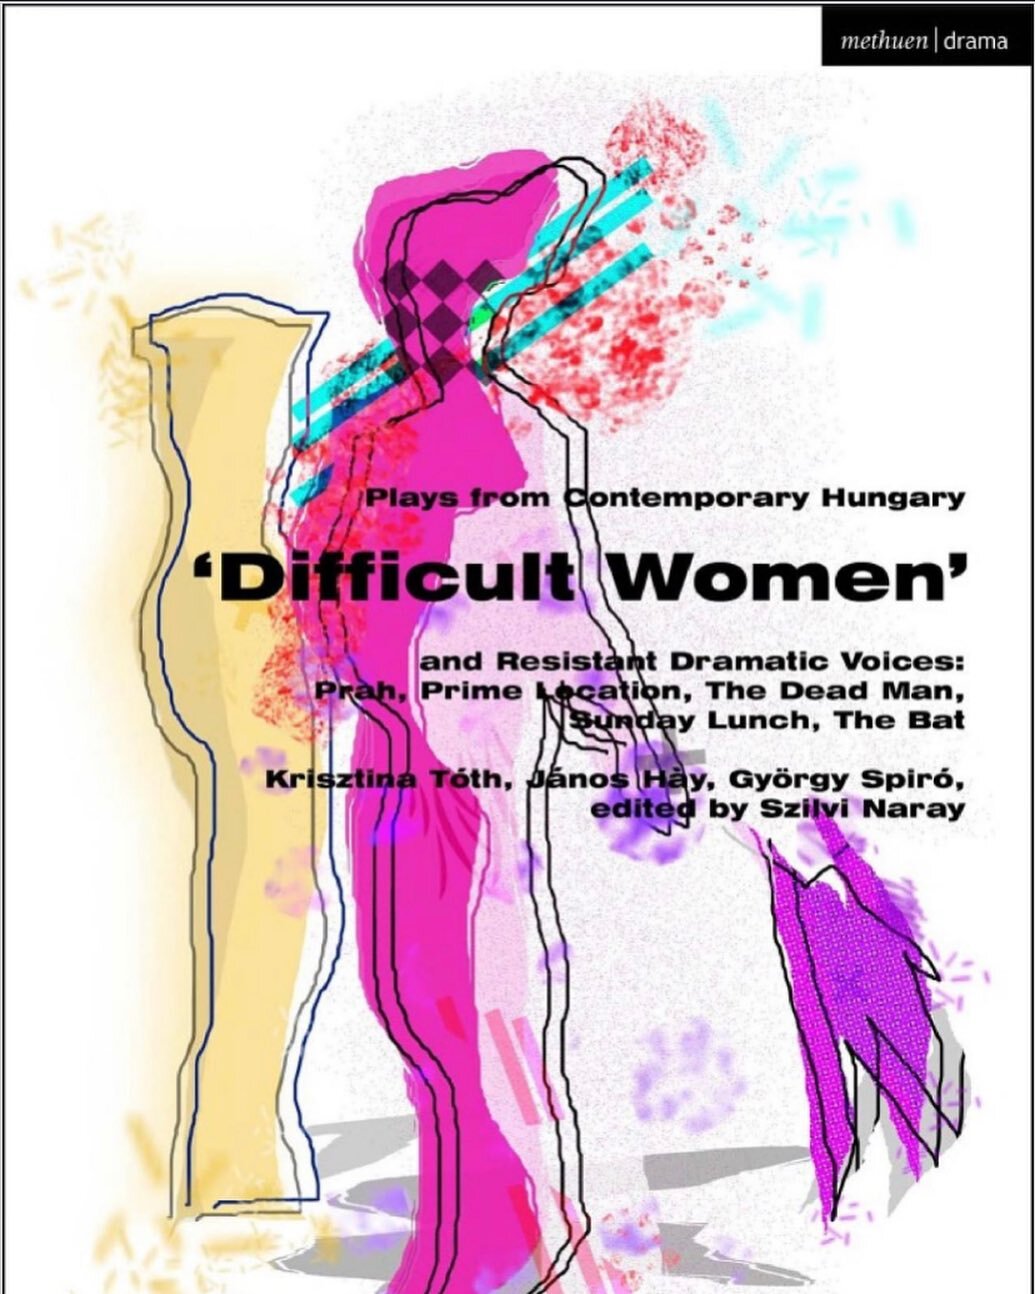 New anthology of Hungarian plays edited by our friend Szilvi Naray-Davey. 

More than a Book Launch: &lsquo;Difficult Women&rsquo; and Resistant Dramatic Voices by Szilvi Naray
 
Thu, 7 Mar 2024 18:30 - 20:00
Digital Performance Lab, University of Sa